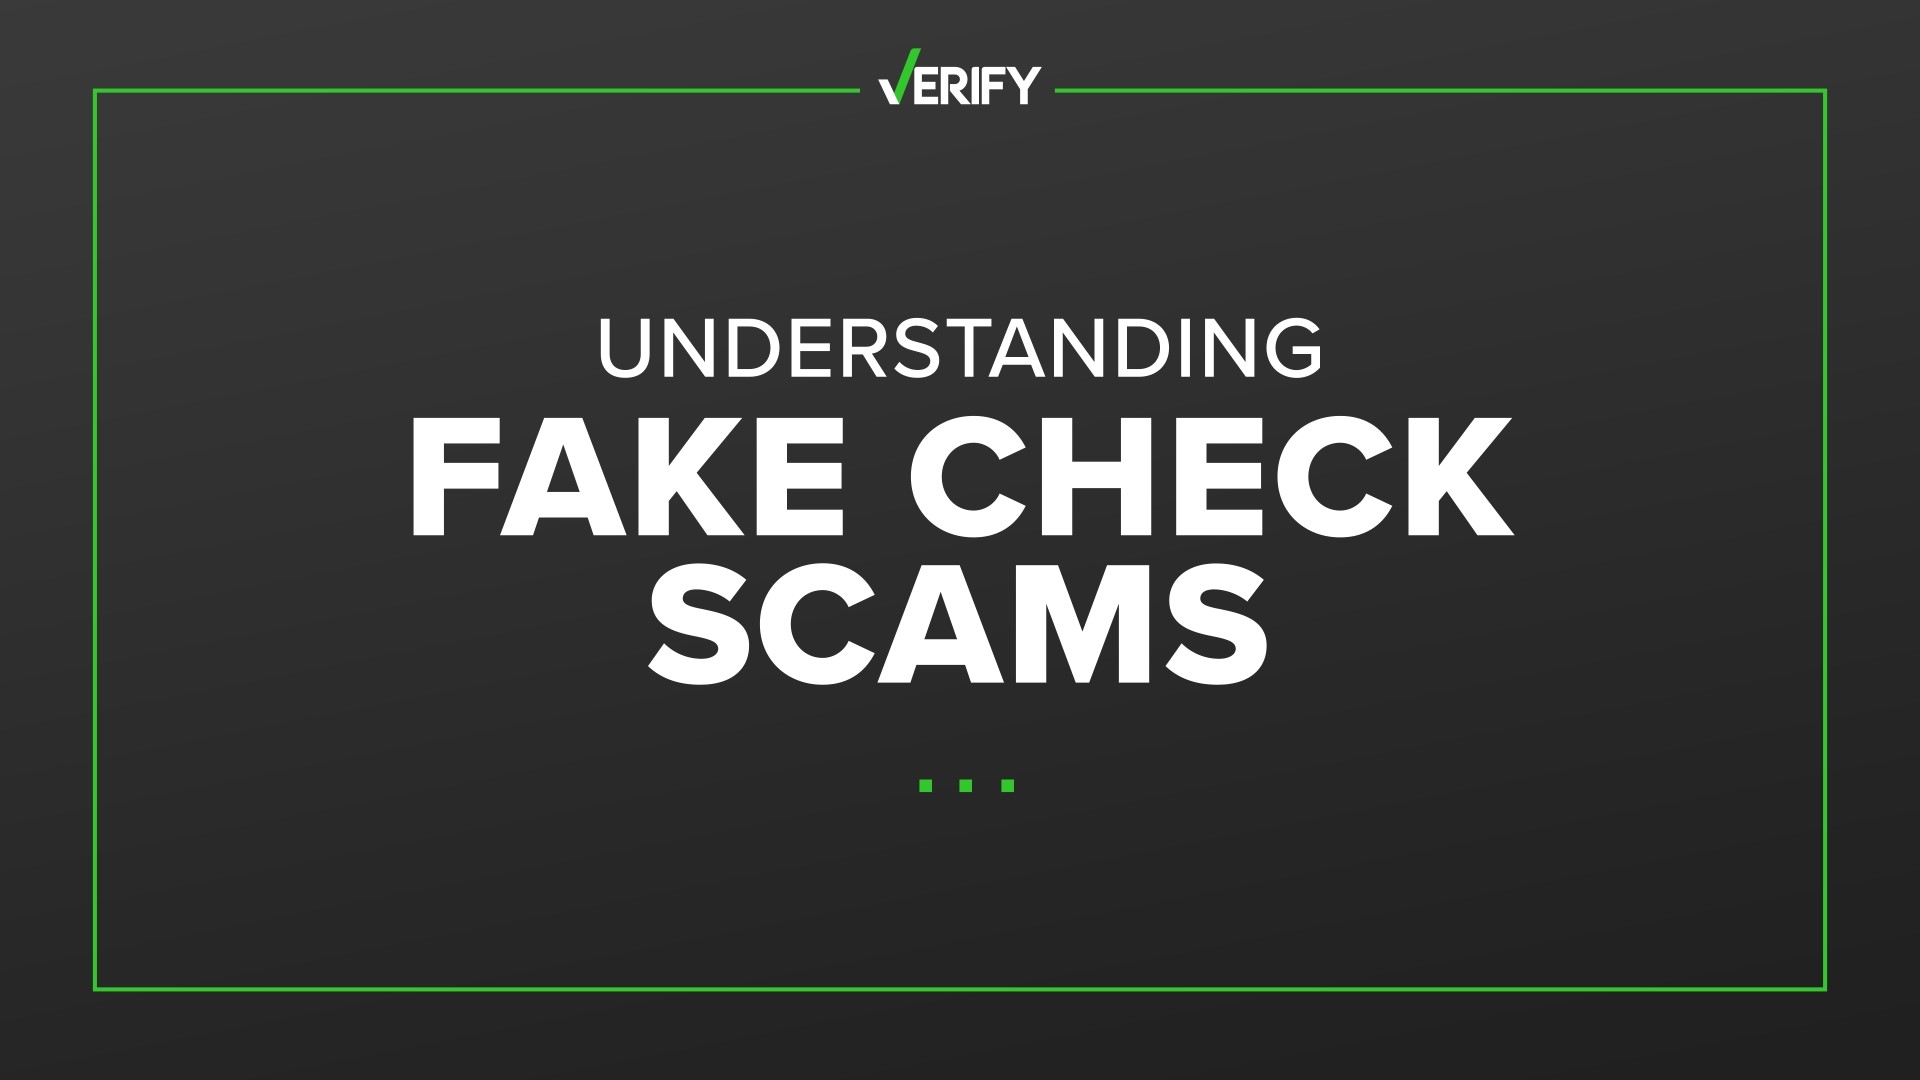 Scammers use fake checks for many different kinds of scams. We VERIFY what to watch out for, and what you can do if you fall victim to a check scam.